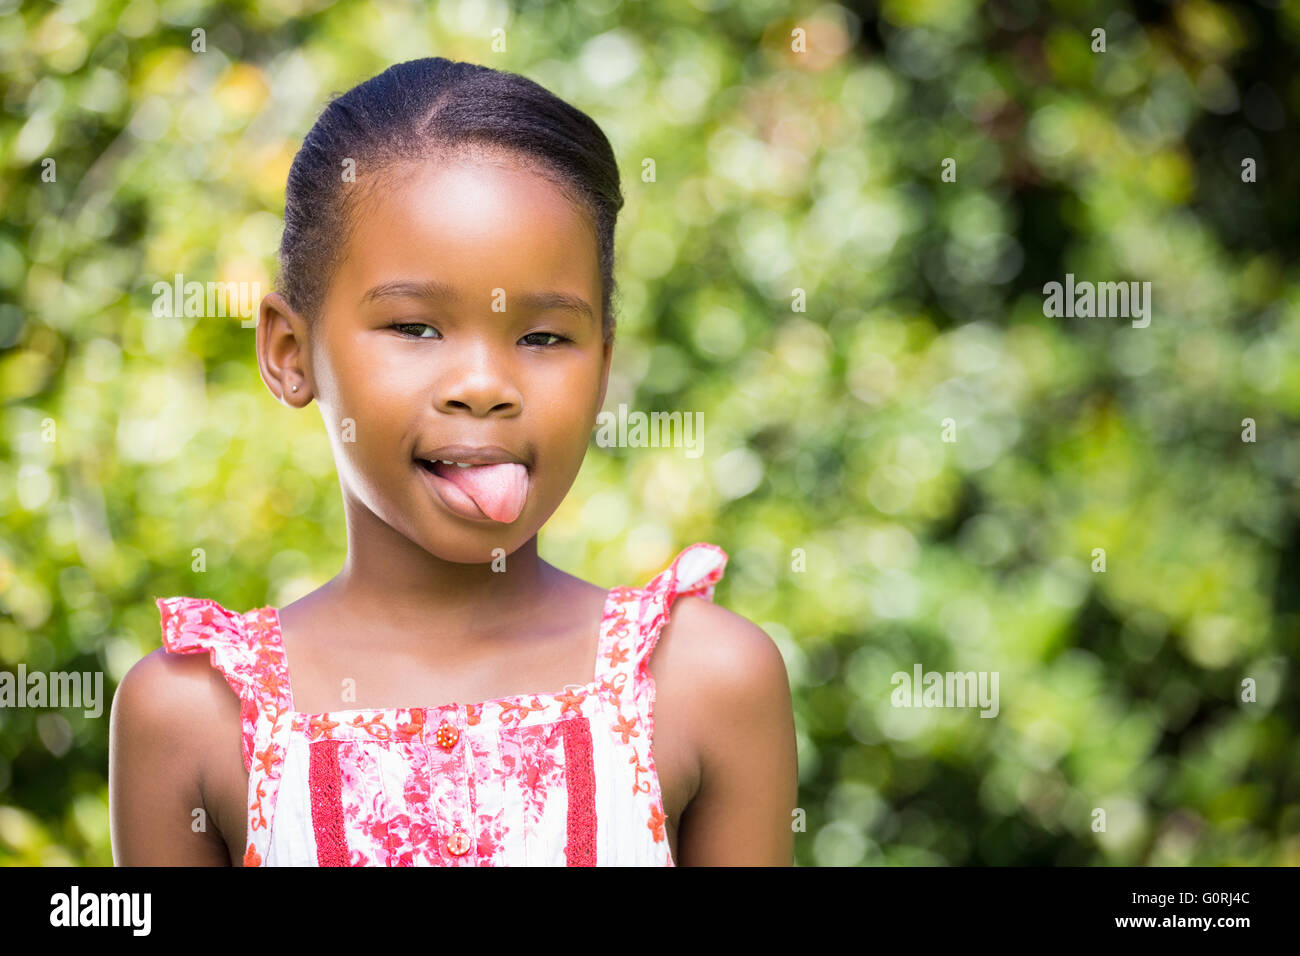 Portrait of kid sticking her tongue out Stock Photo